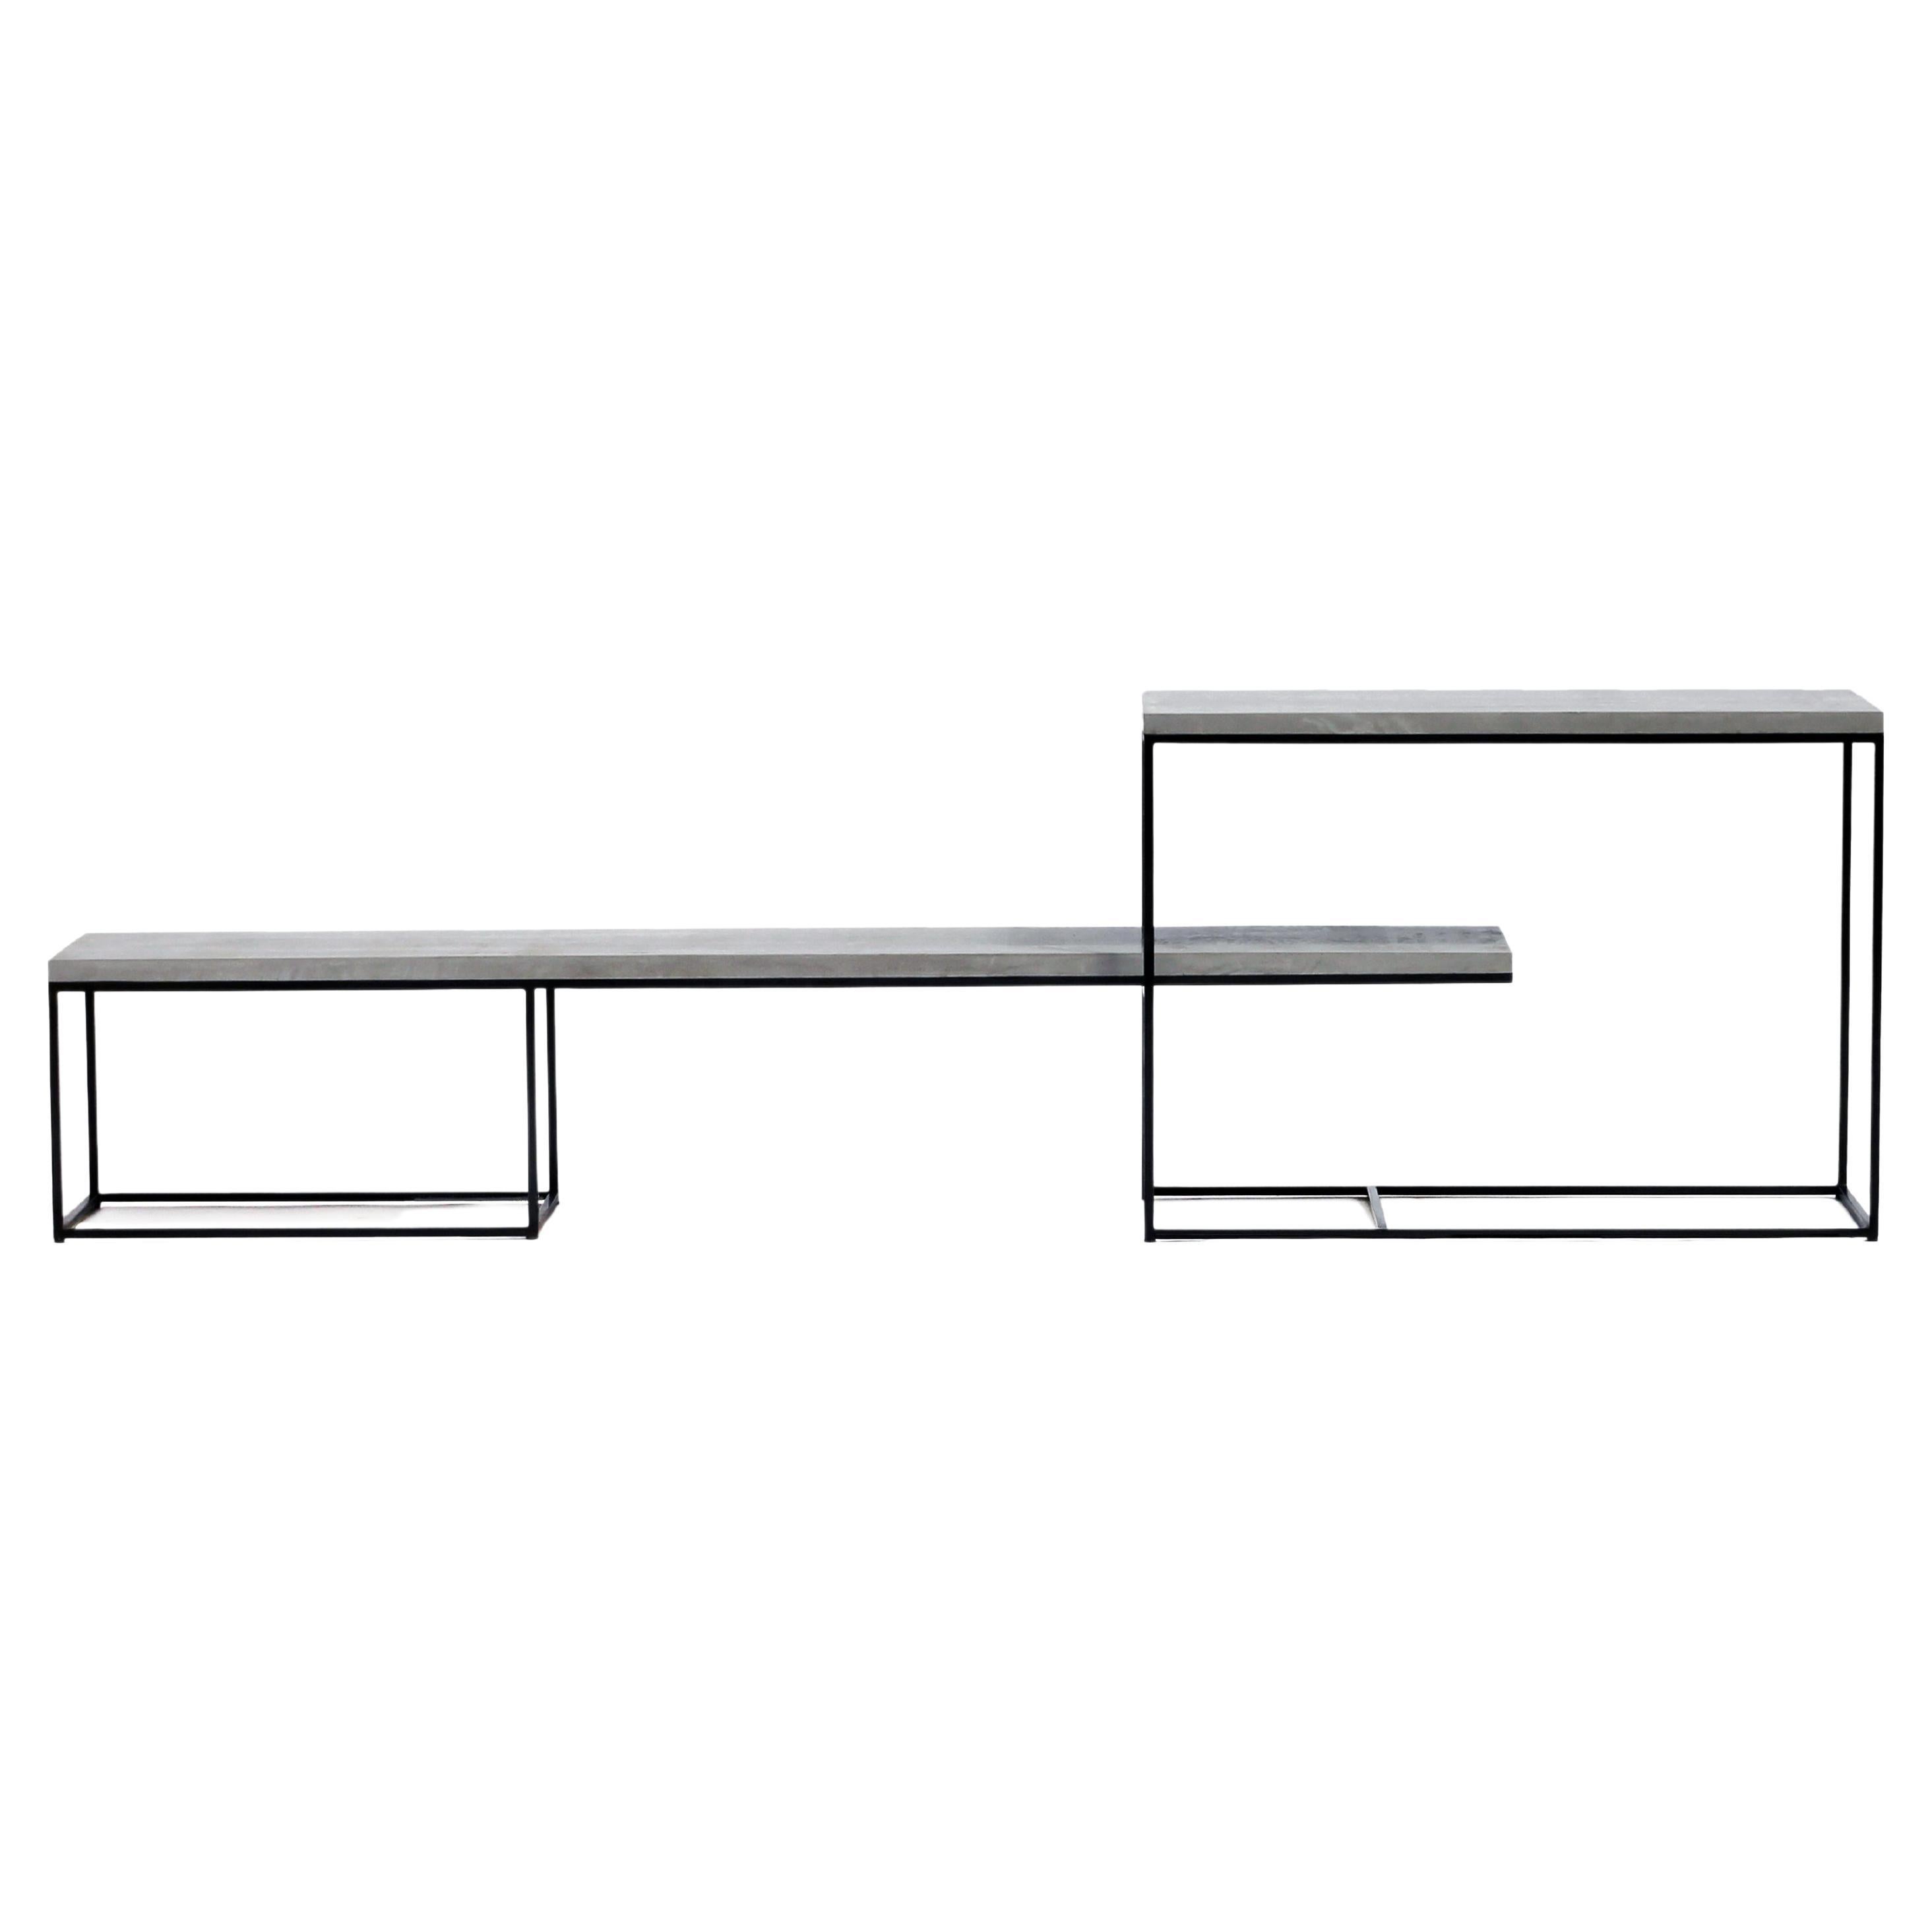 EE Bench-Console, Concrete + Steel Collection from Joshua Howe Design